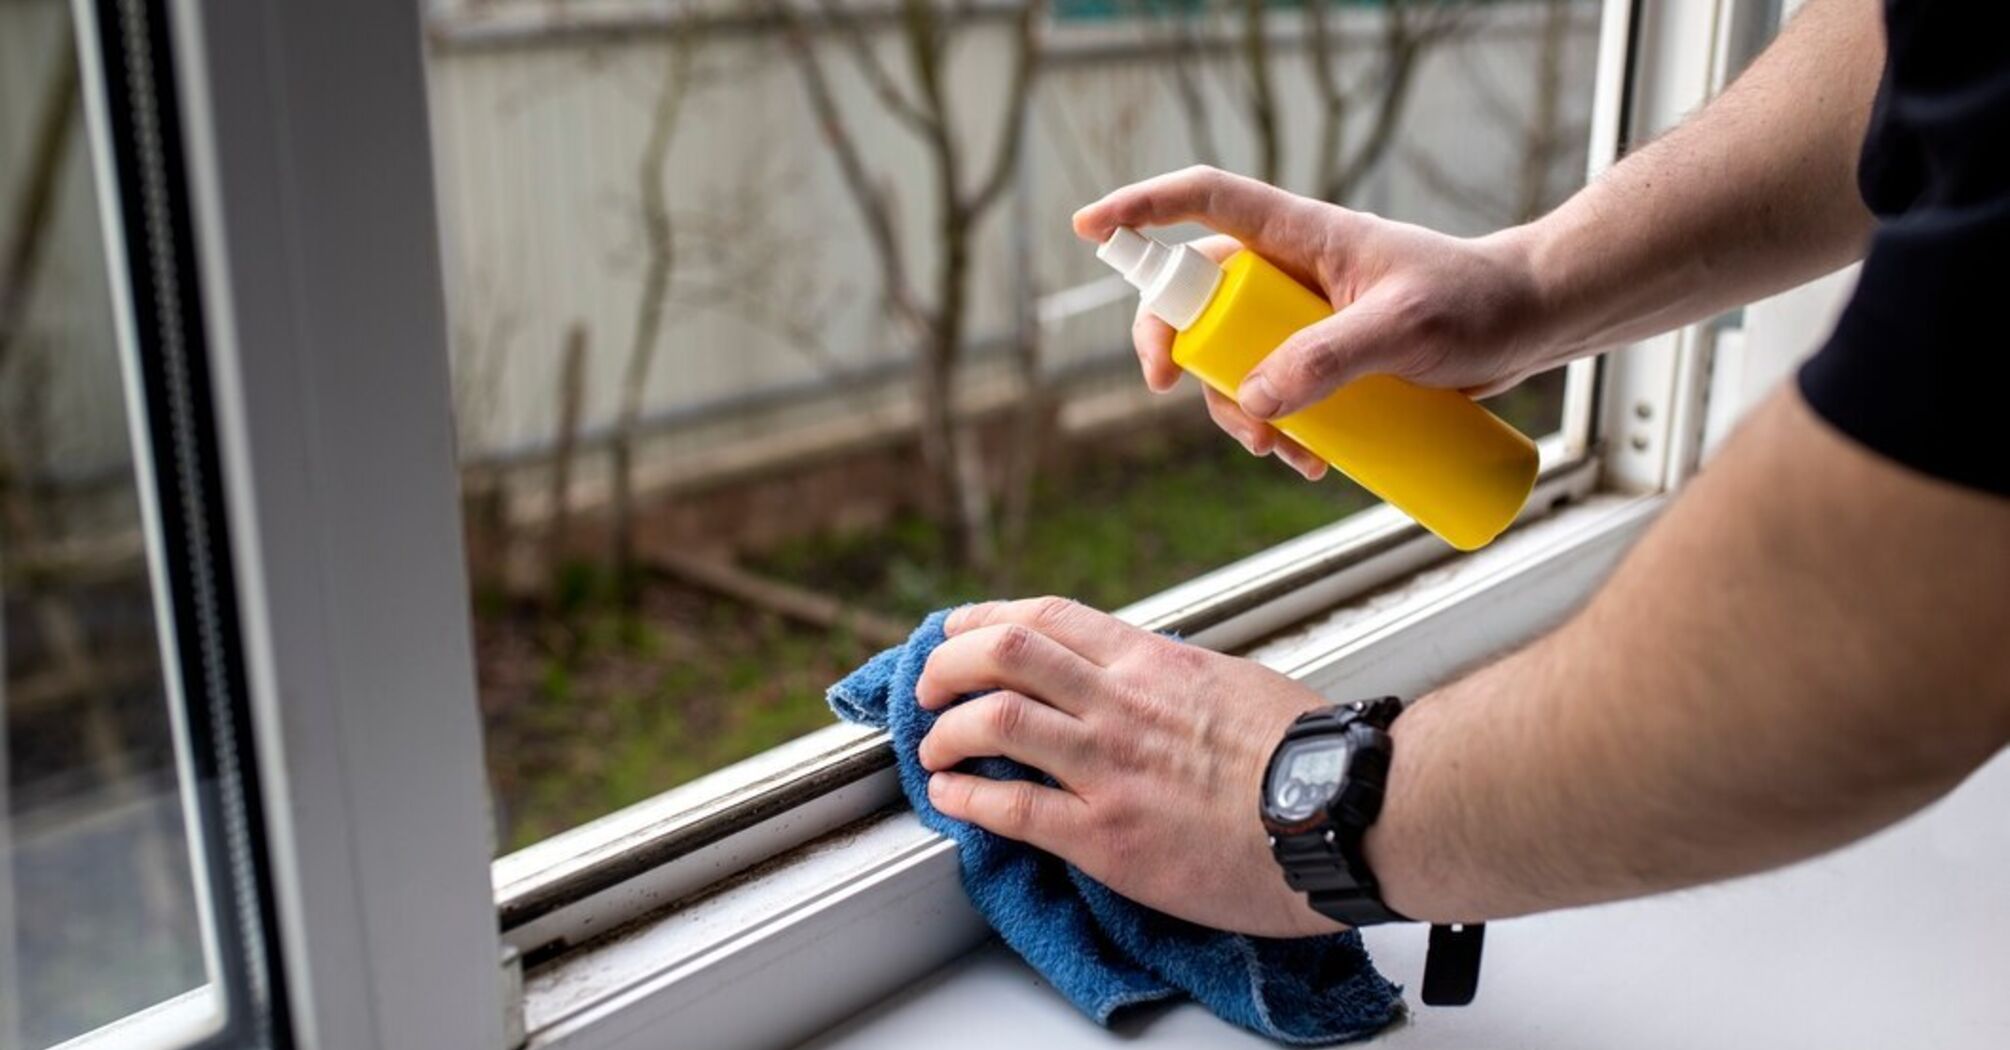 How to whiten a yellowed window sill: 4 effective remedies